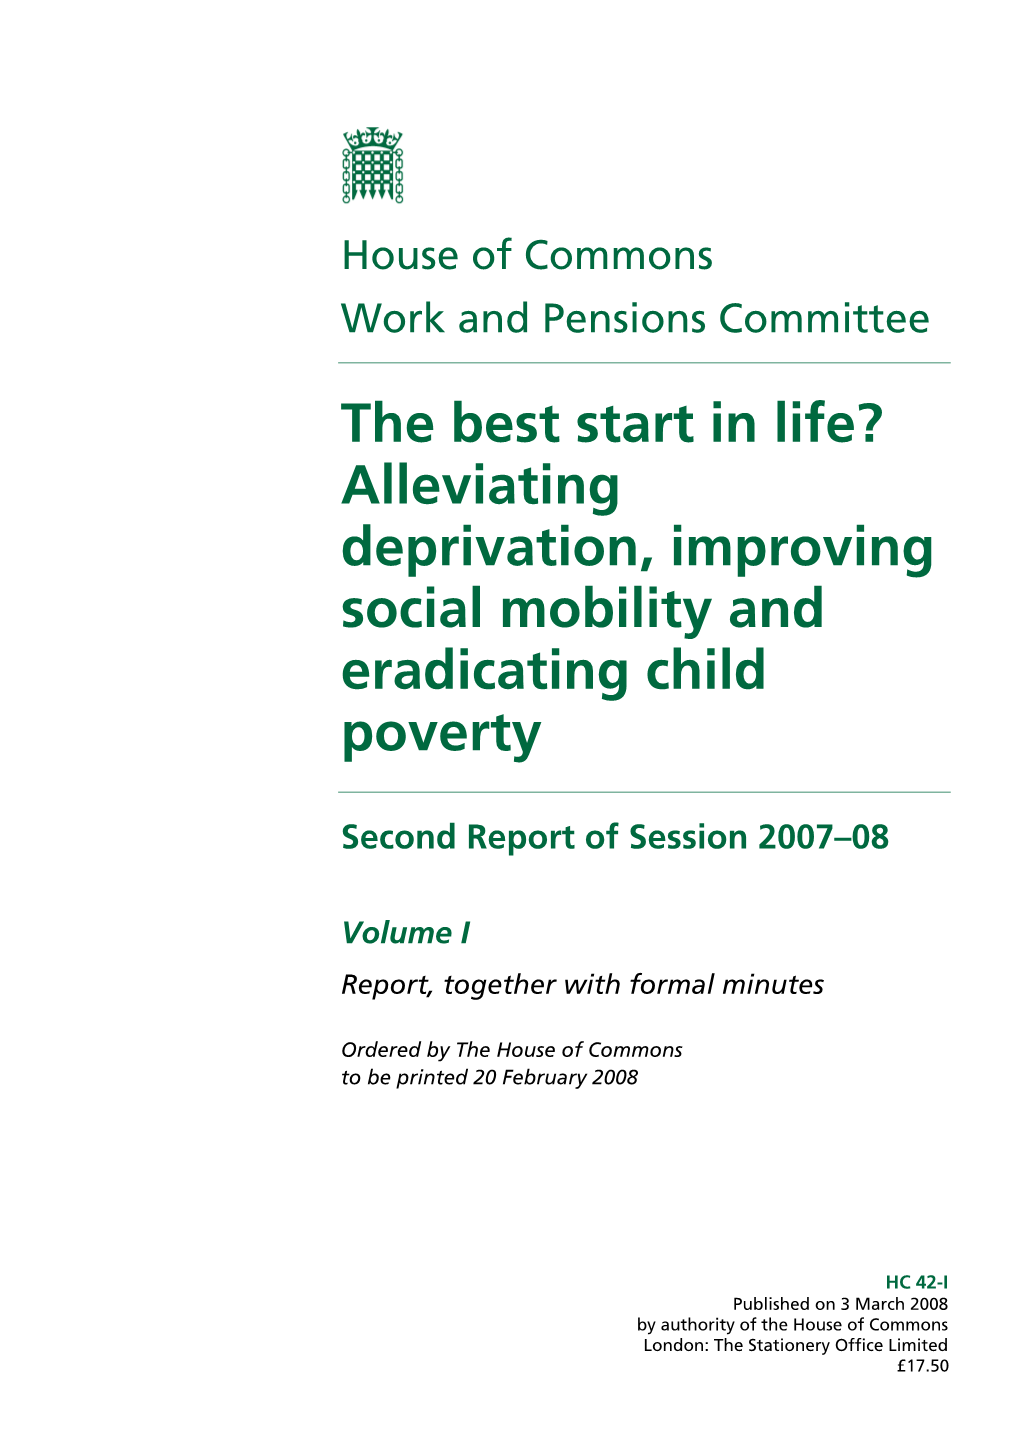 Deprivation, Improving Social Mobility and Eradicating Child Poverty